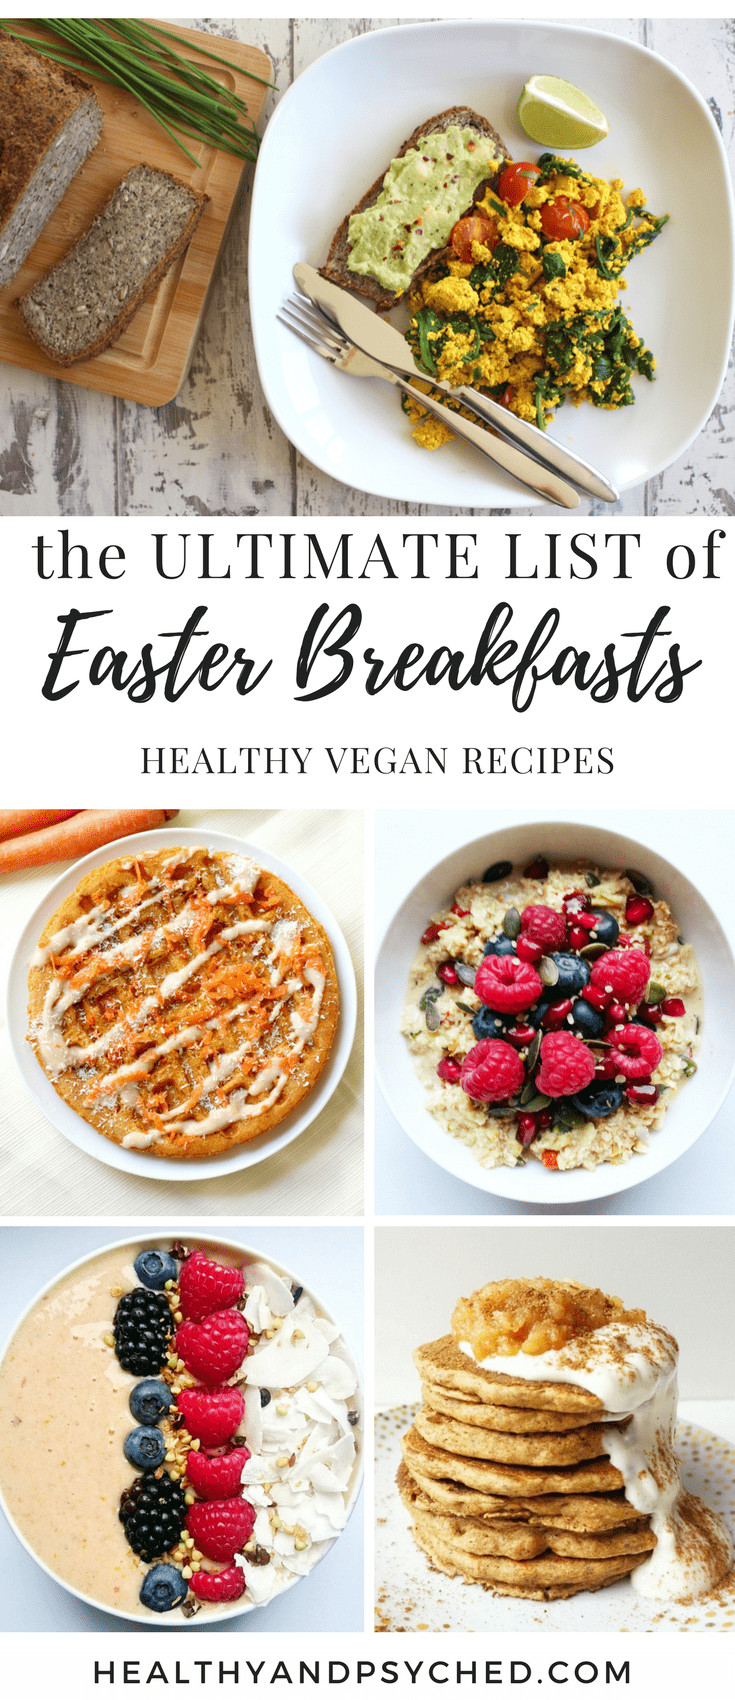 Vegetarian Easter Brunch Recipes
 The Ultimate List of Vegan Easter Recipes Healthy & Psyched